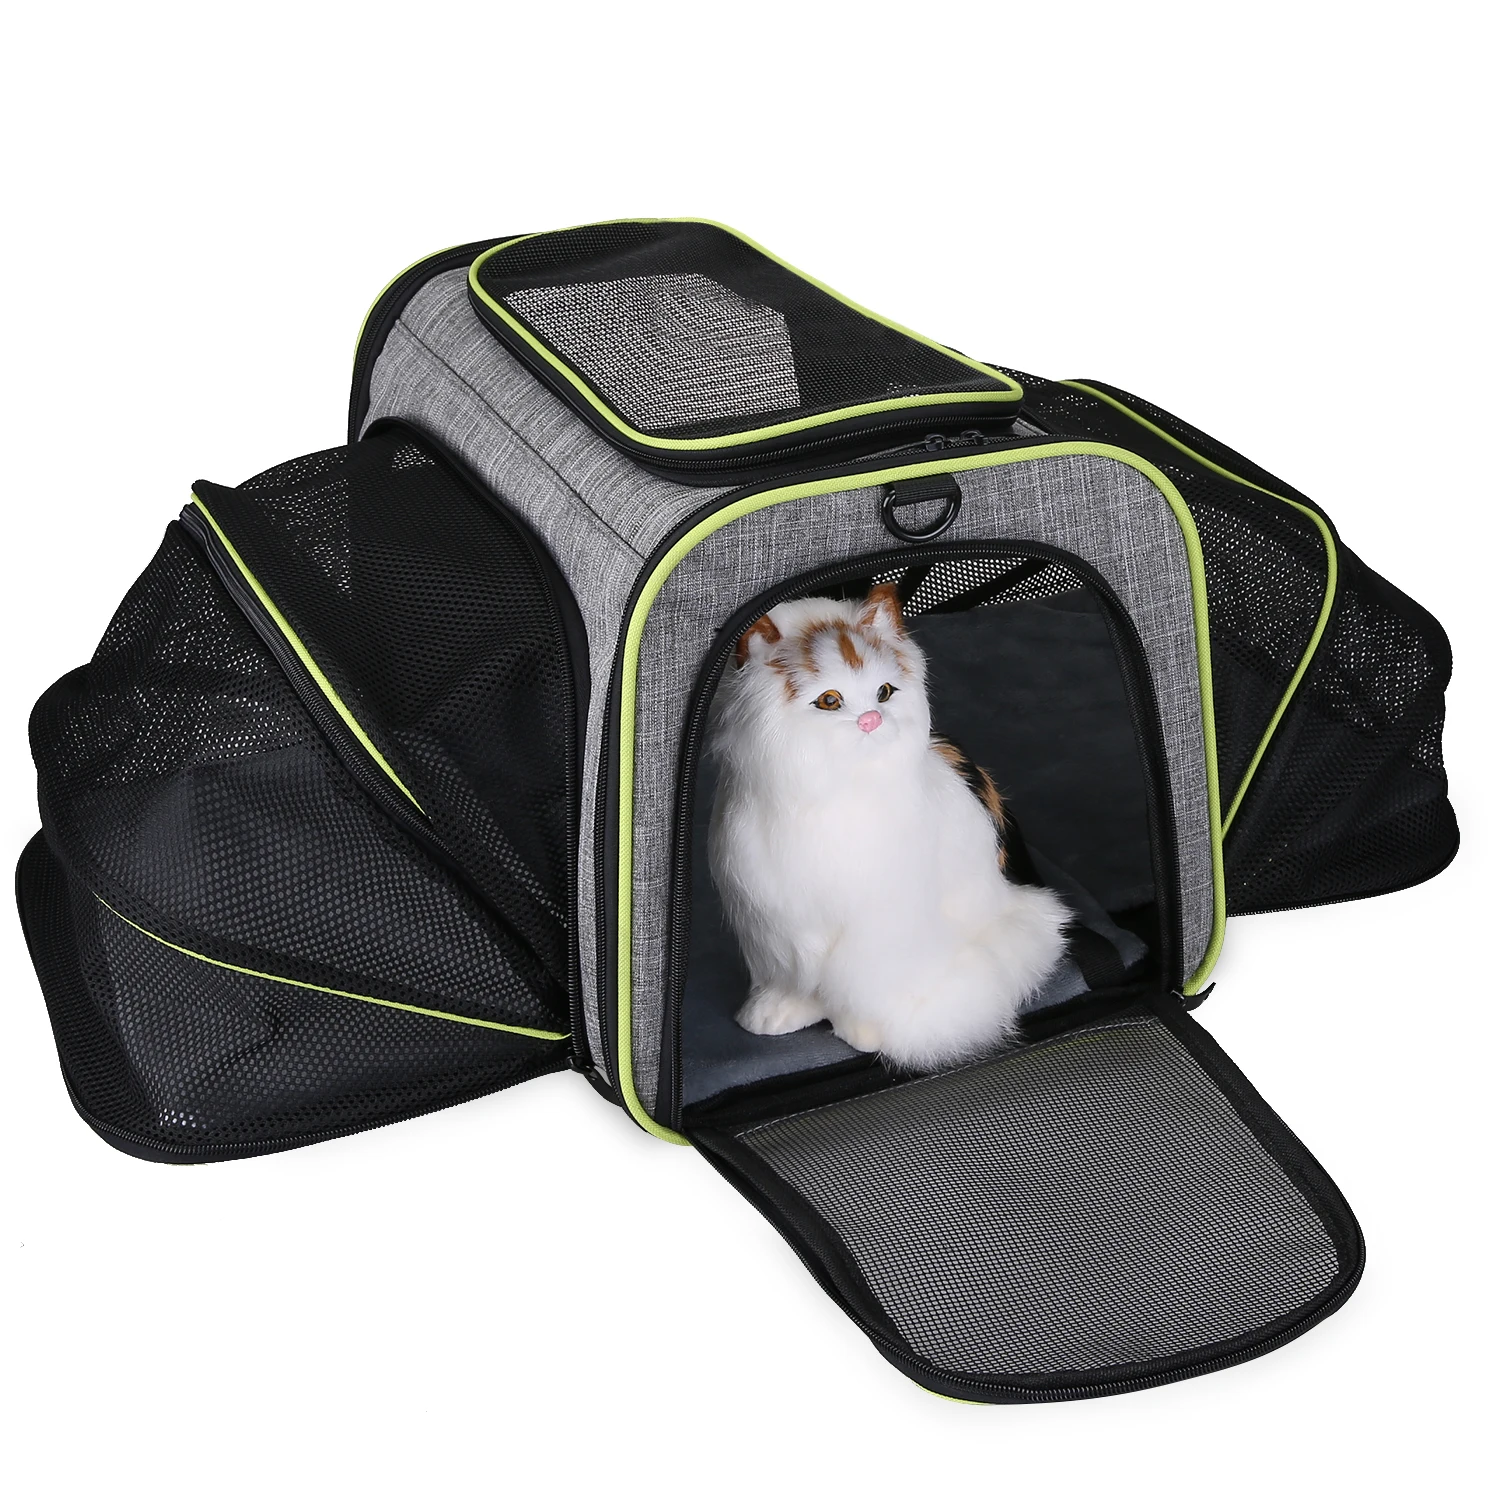 Xinvivion Pet Carrier with Mesh Opening Portable Travel Carriers Bag for Cats/Puppies/Small Dogs/Rabbits